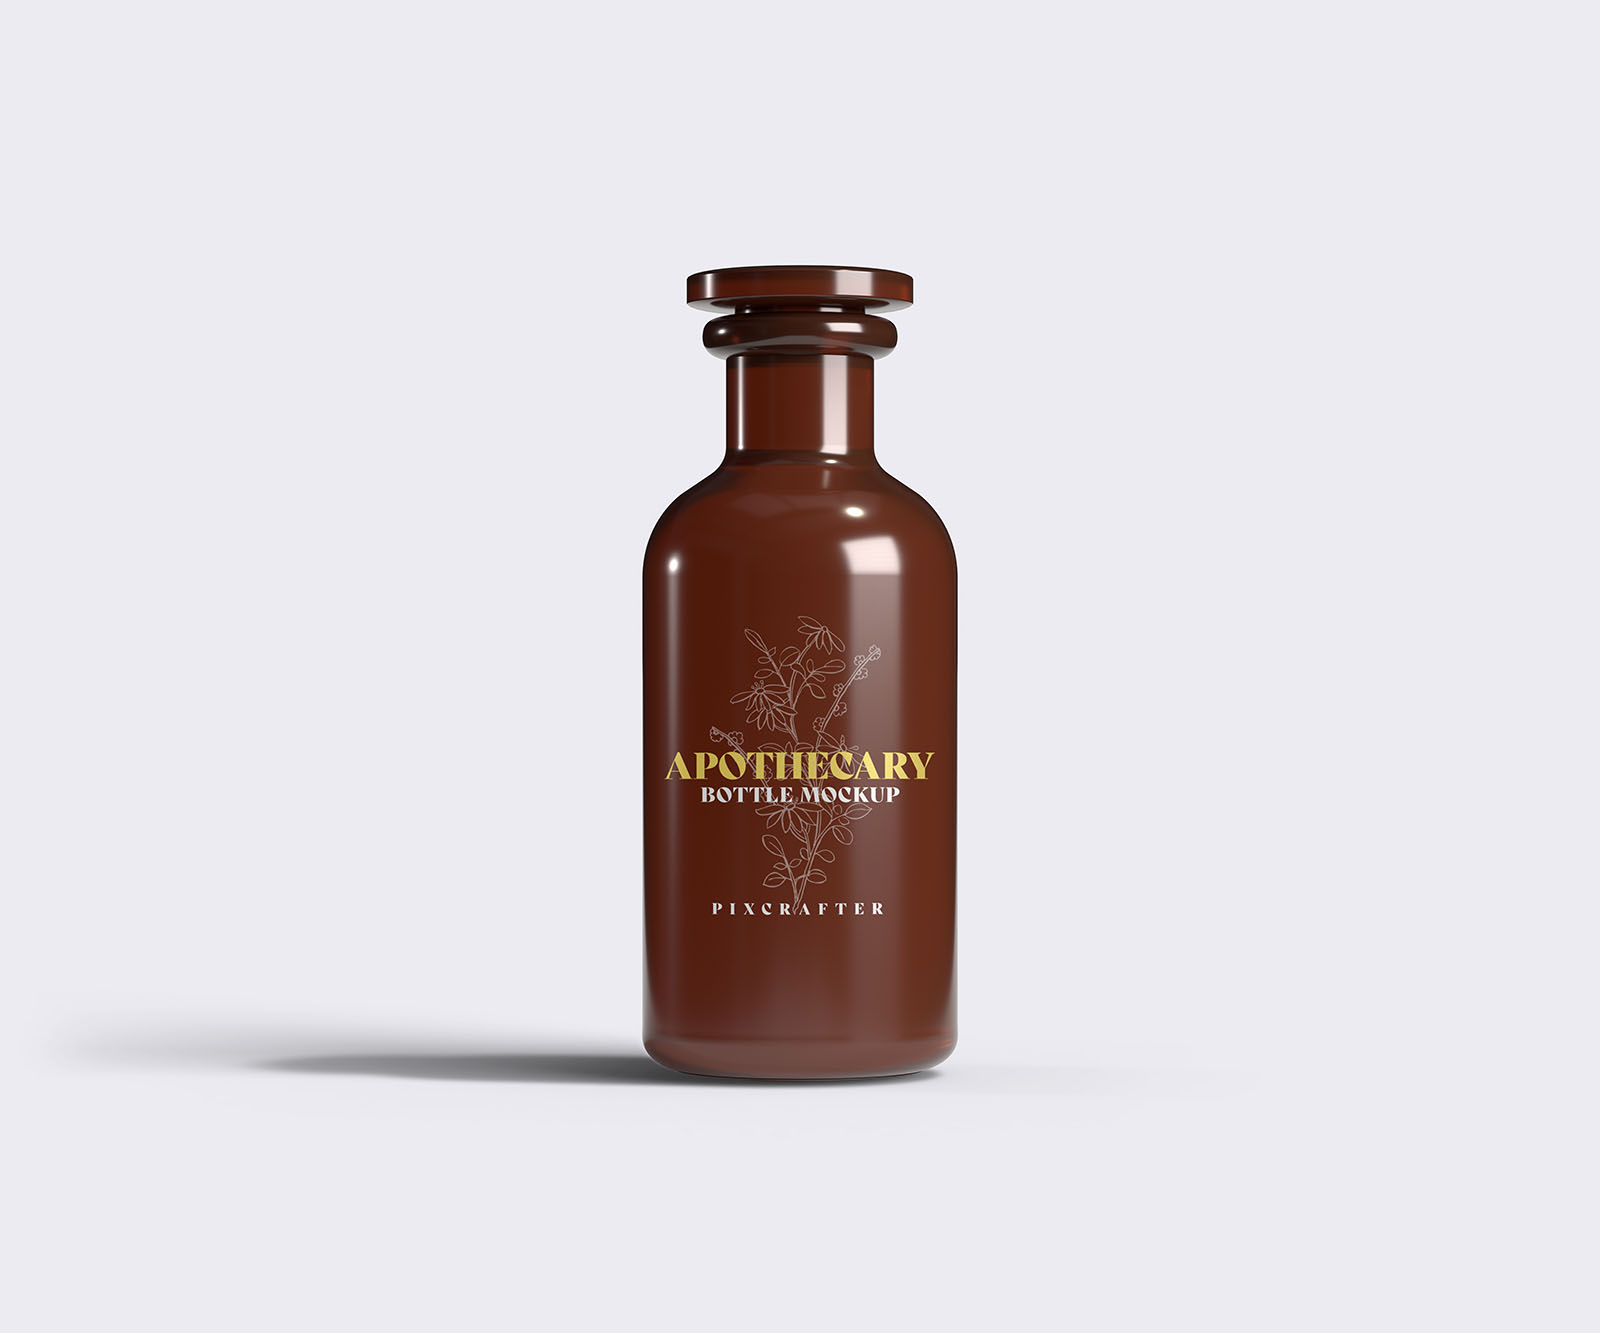 Free apothecary bottle mockup PSD template